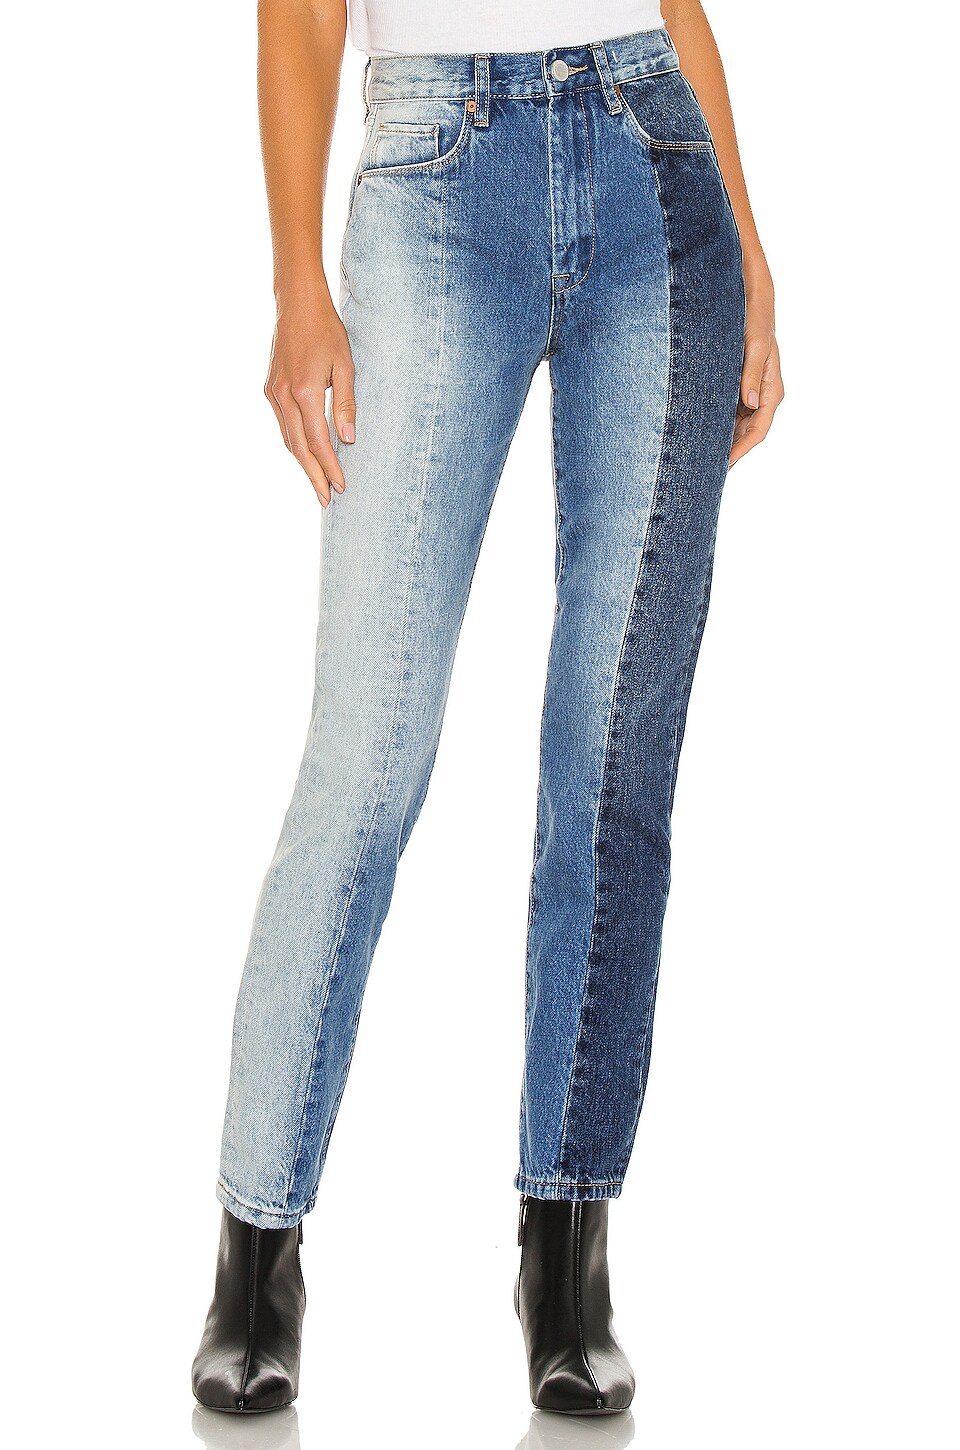 BLANKNYC Ultra High Rise Skinny in All Or Nothing | REVOLVE